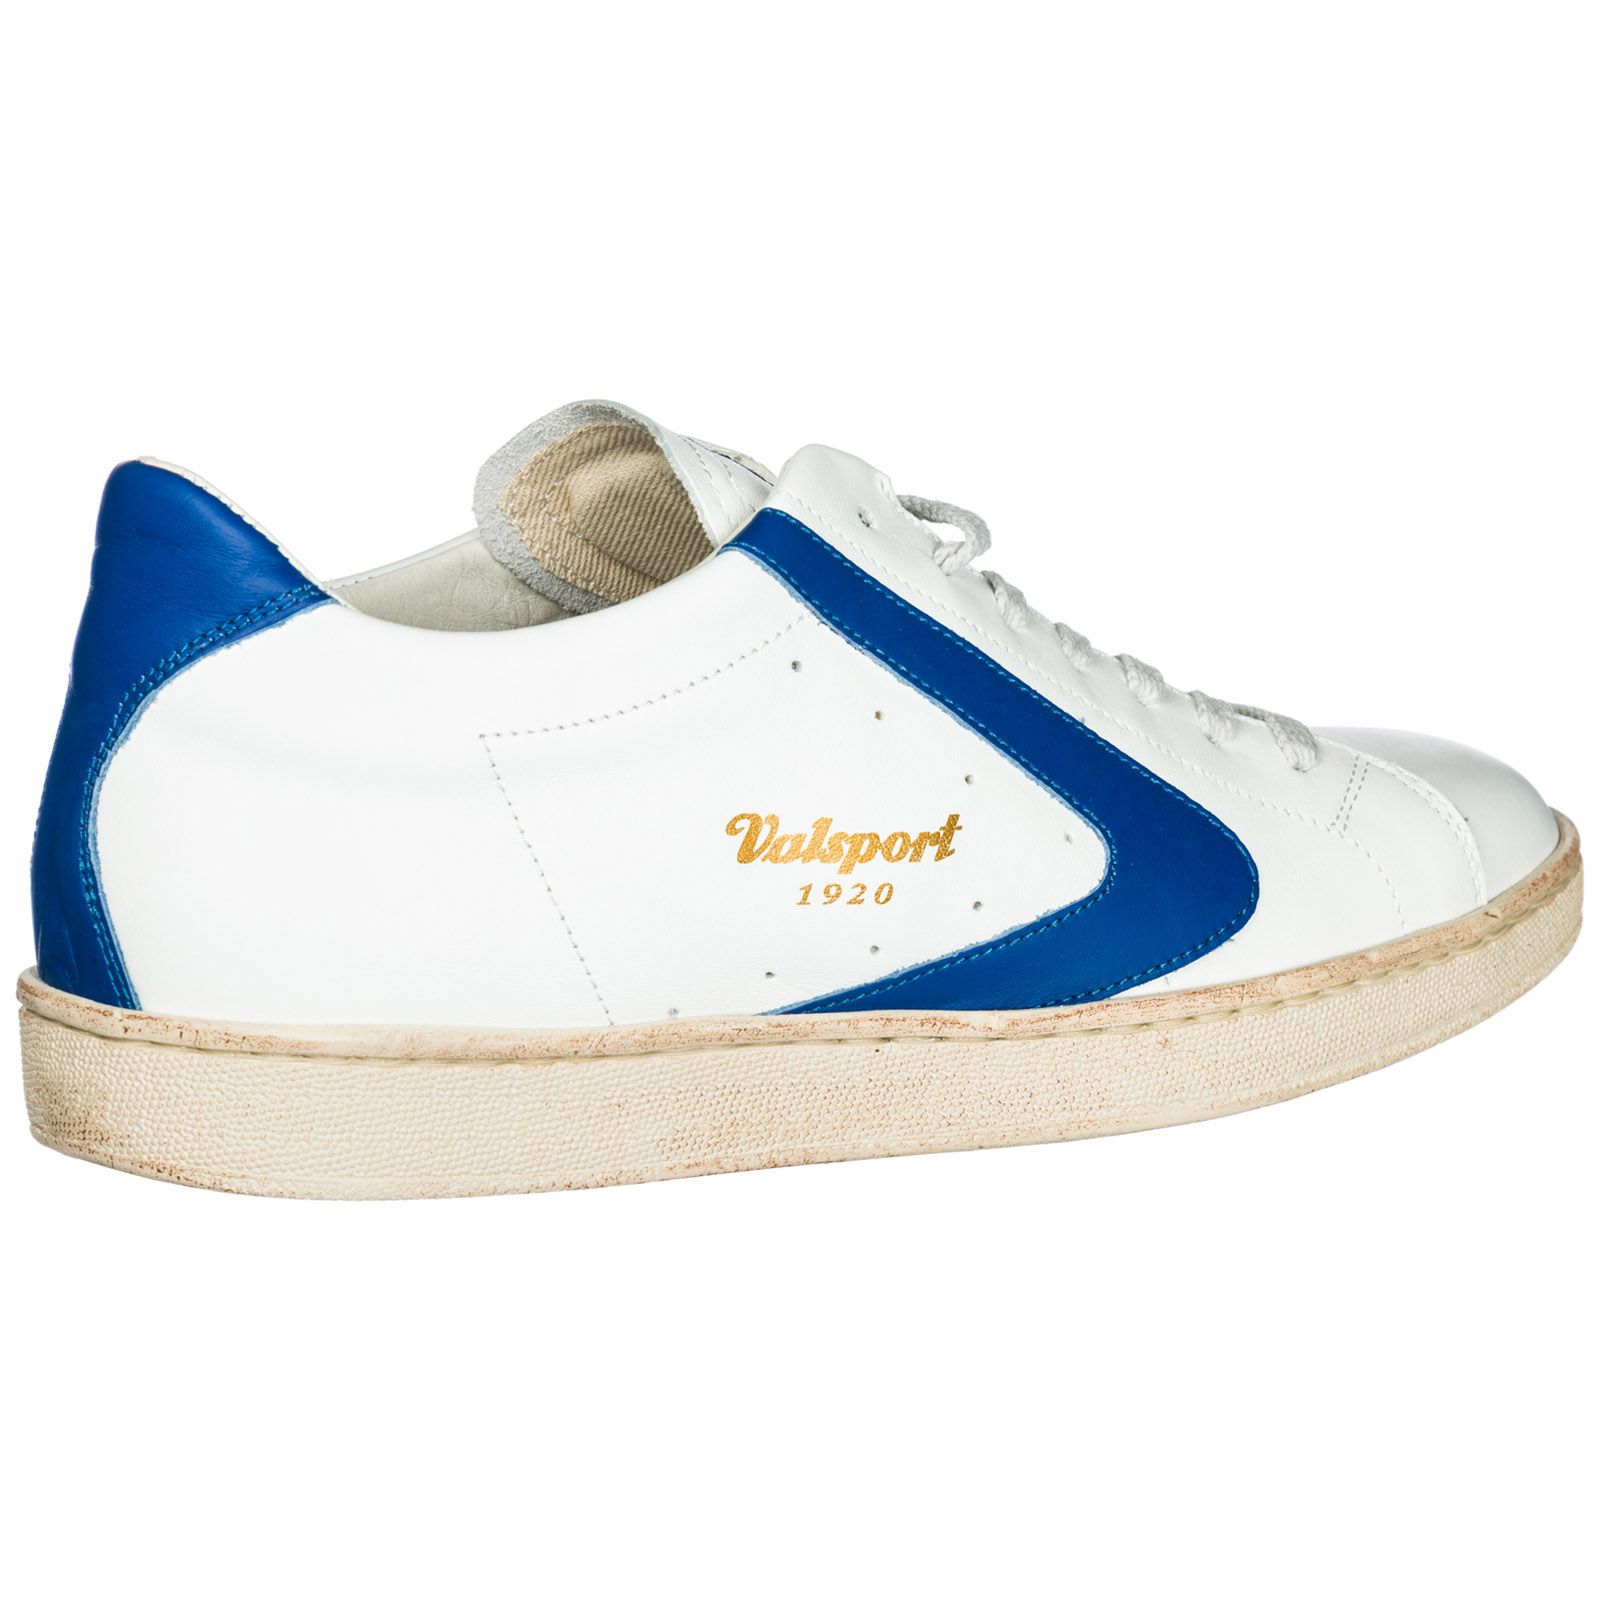 Valsport Valsport Shoes Leather Trainers Sneakers Tournament - Bianco ...